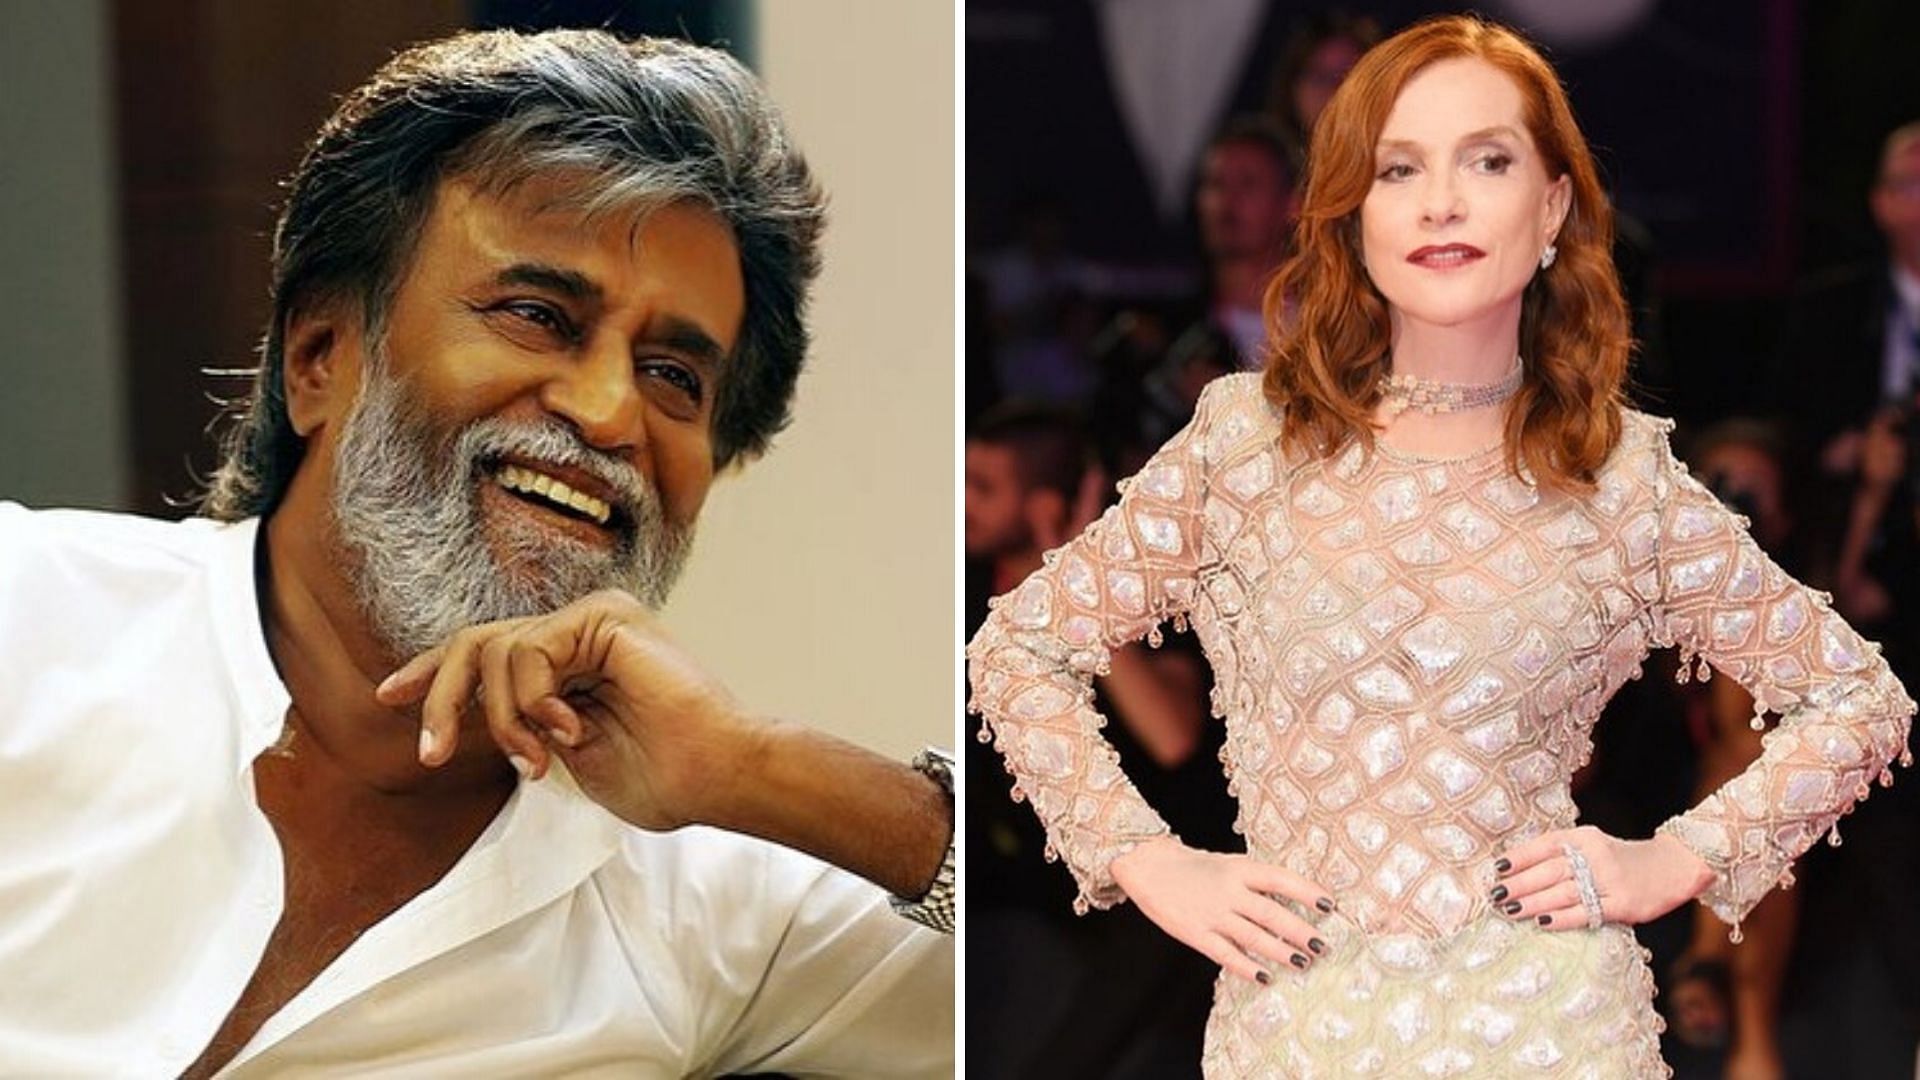 Rajinikanth (L) and Isabelle Huppert (R) to be honoured.